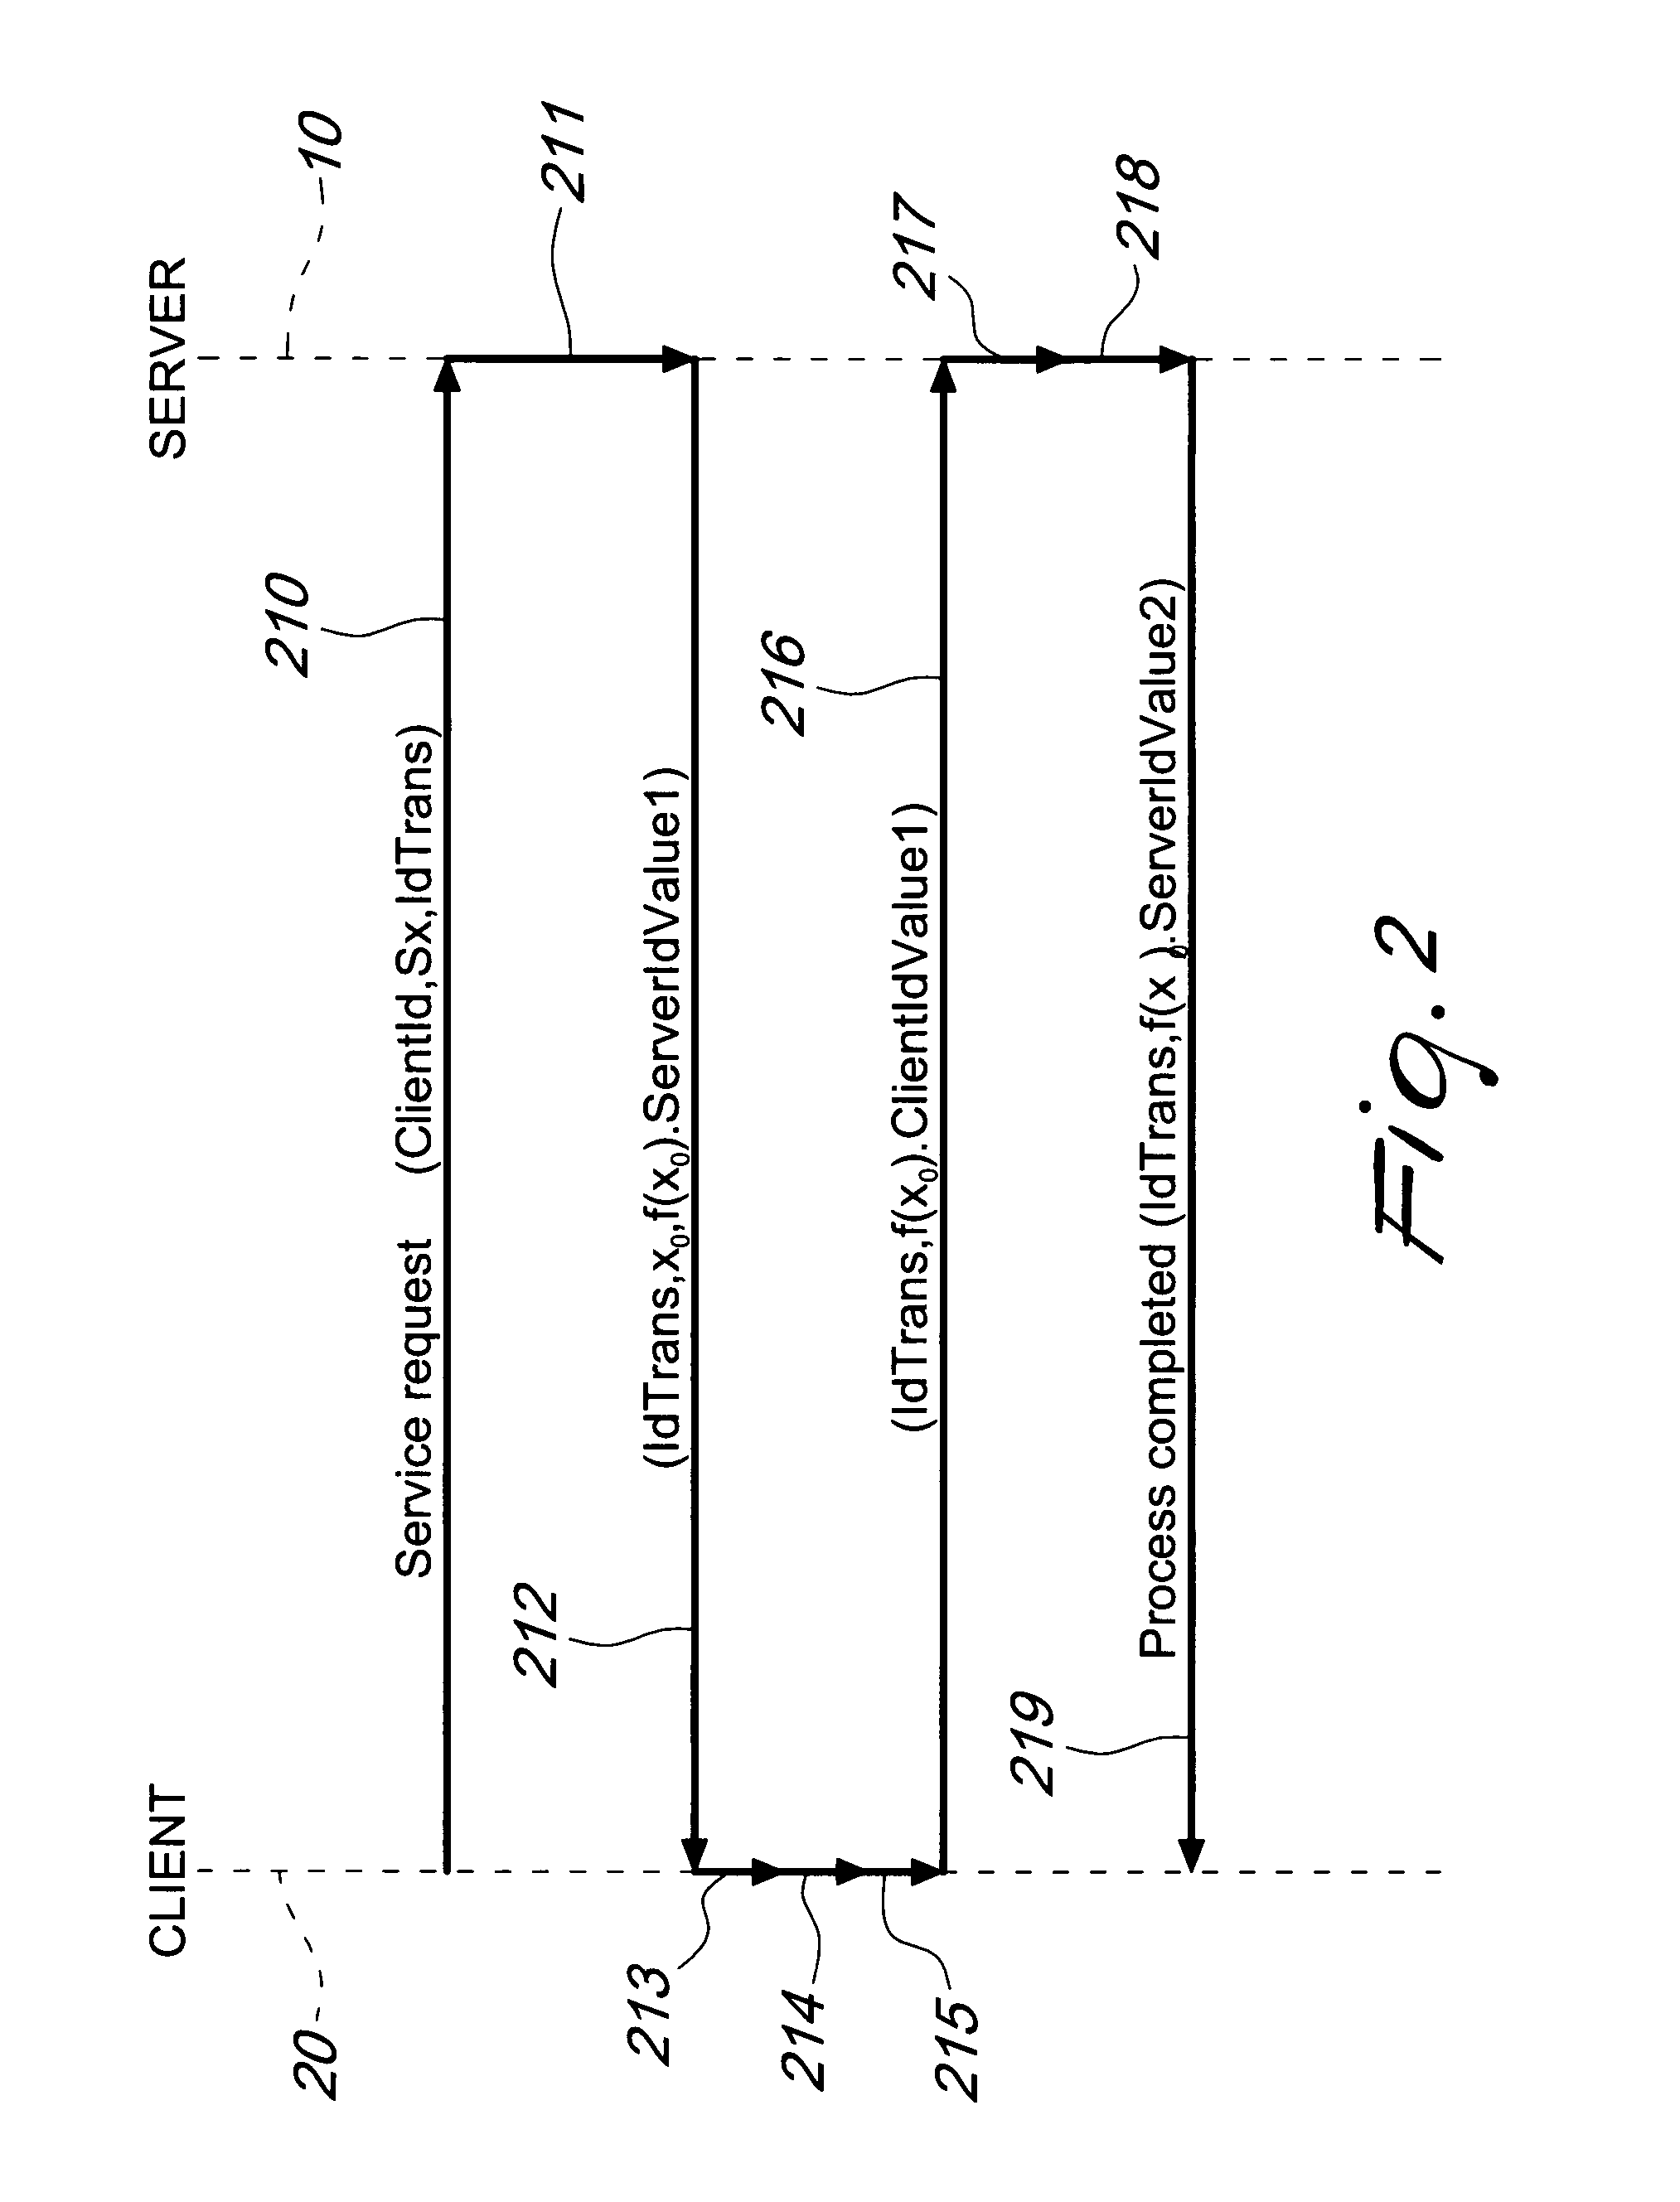 System and method for inherently secure identification over insecure data communications networks